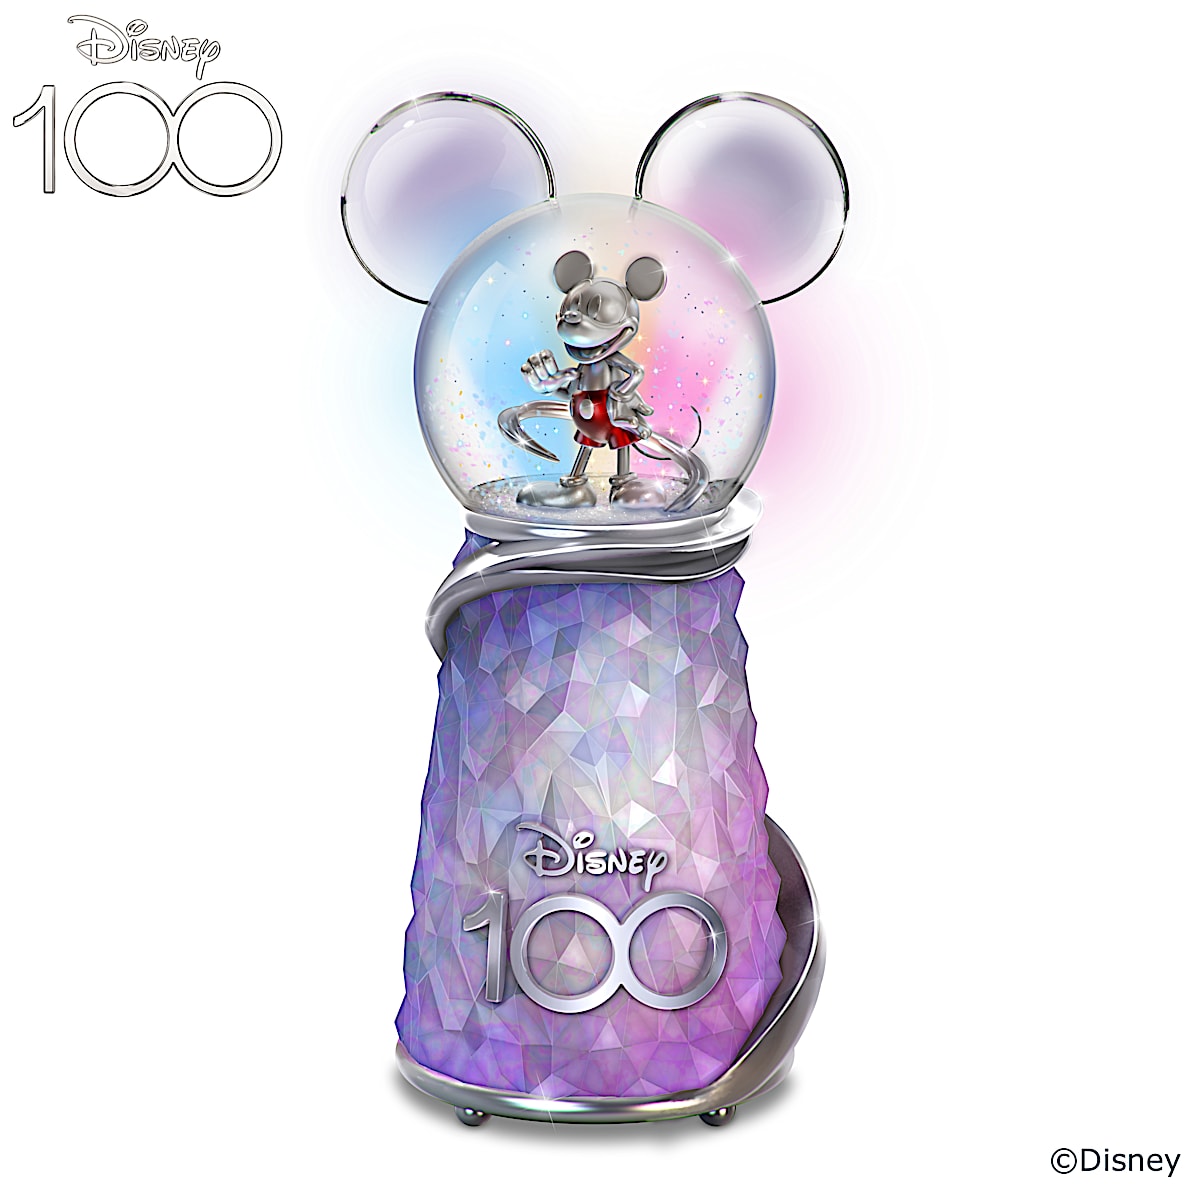 100 Years Of Wonder Illuminated Special Edition Laser-Etched Glass Globe  With A Prismatic Base Adorned With Disney Characters